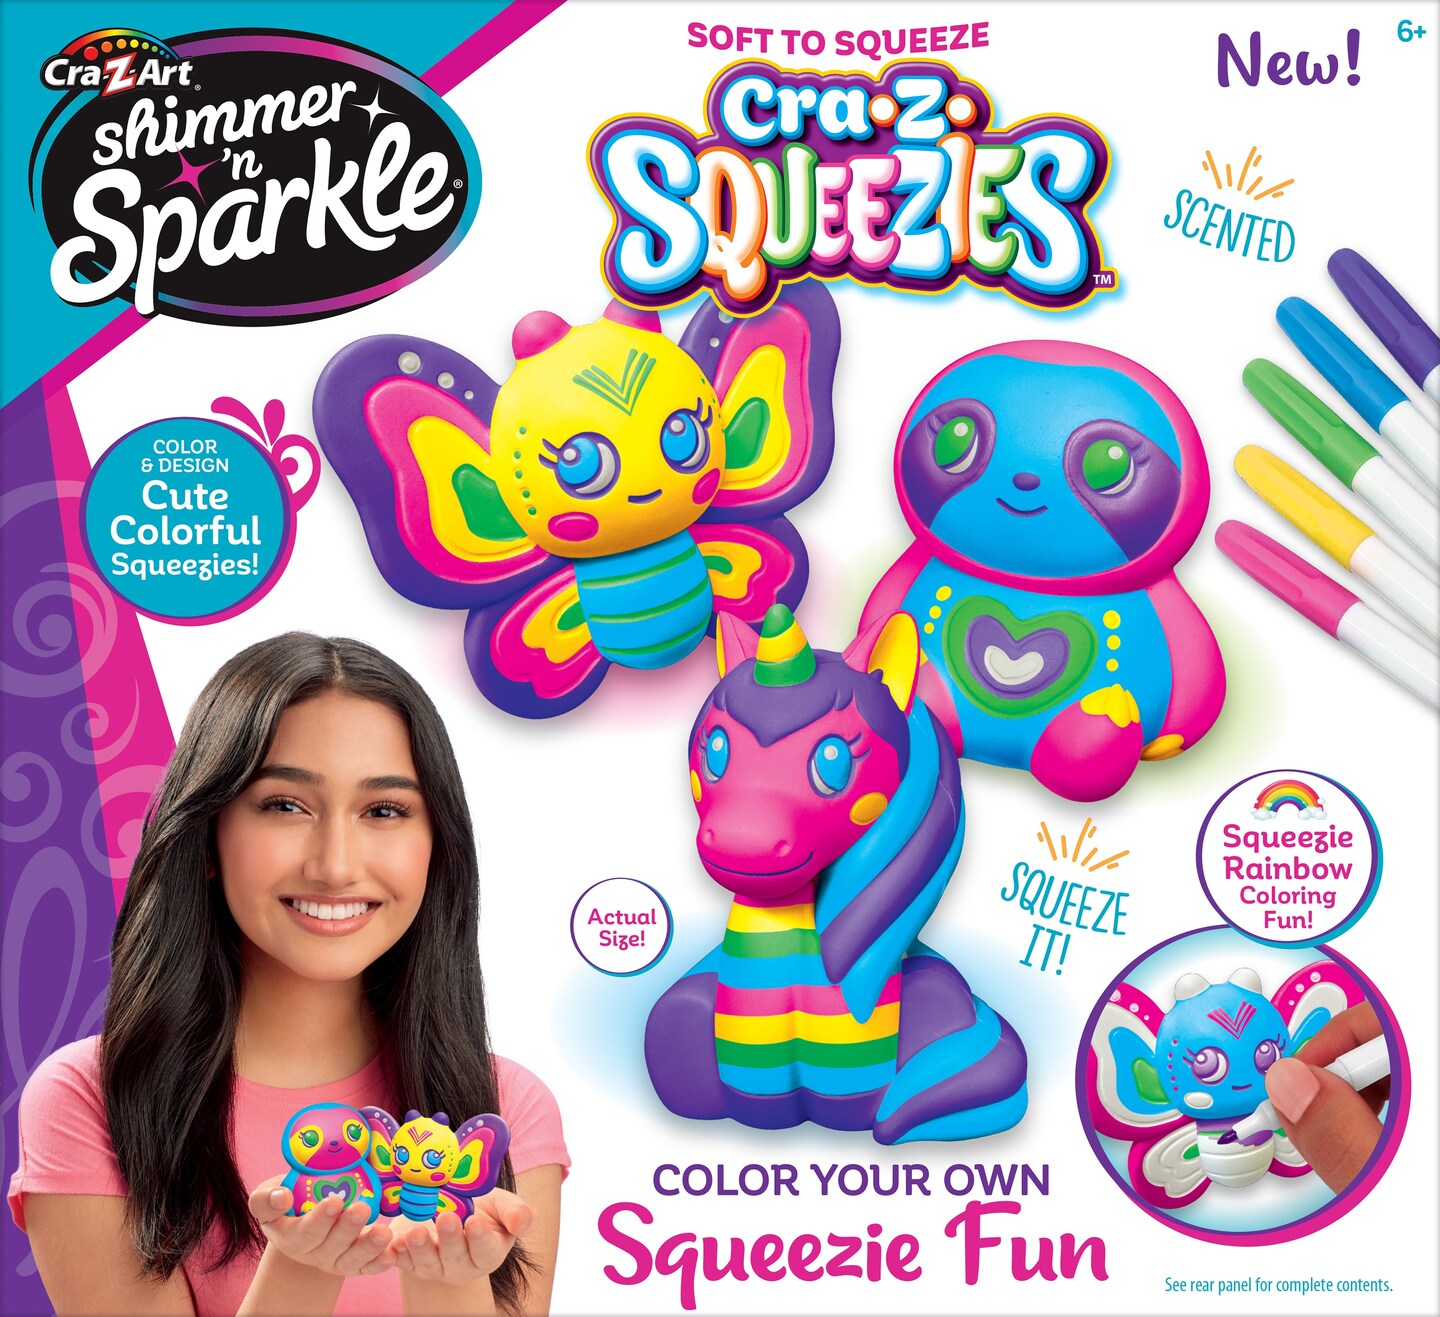 Cra-Z-Art Shimmer &#x27;N Sparkle Color Your Own Squeezie Fun